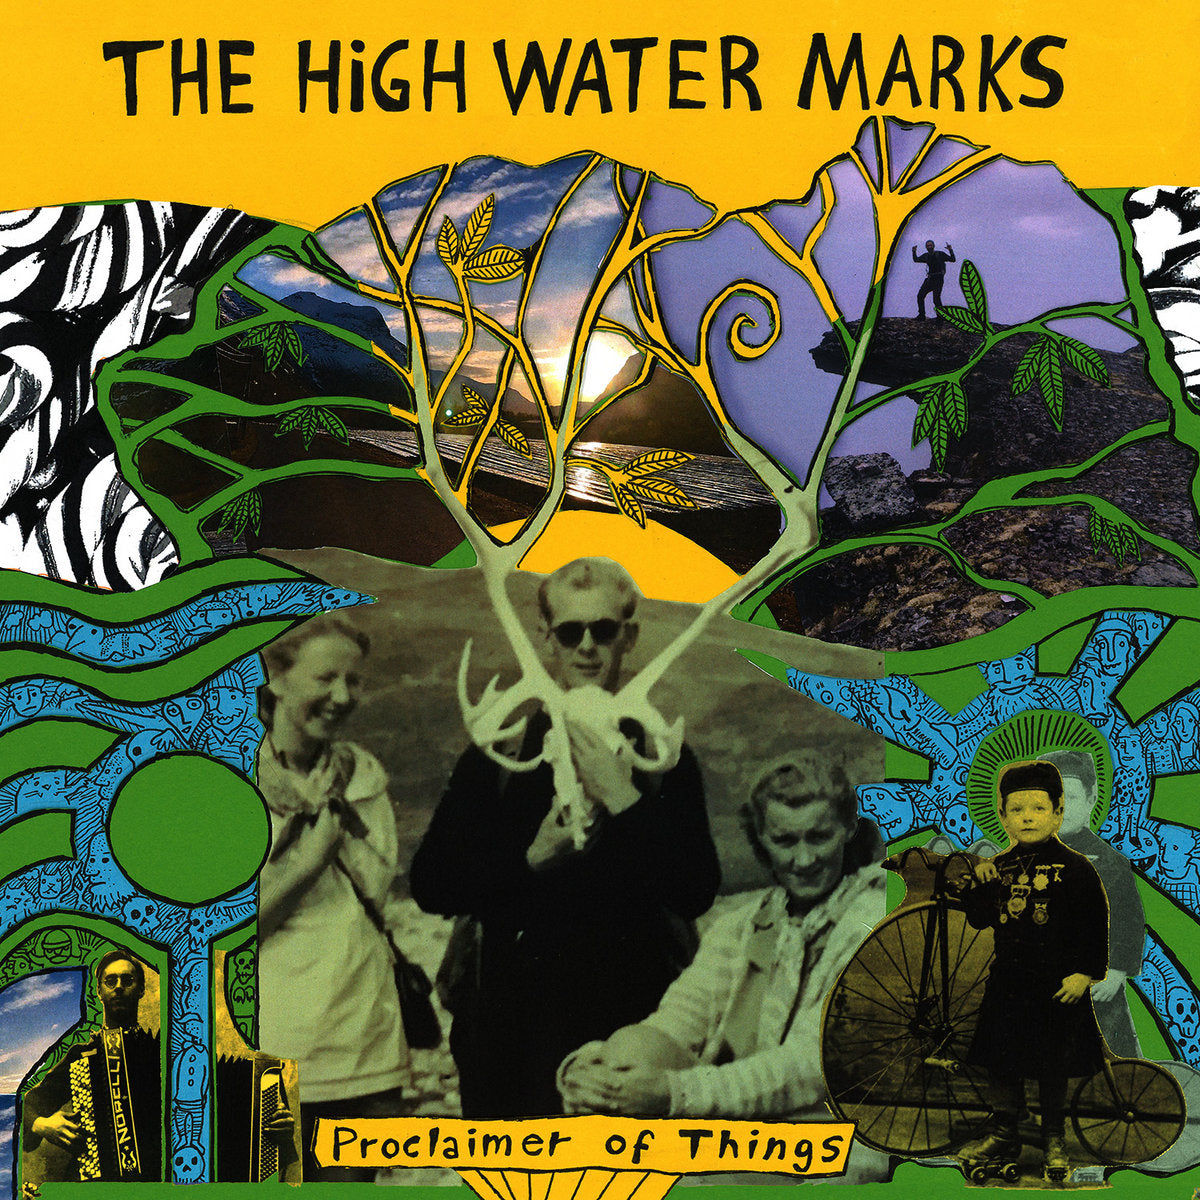 High Water Marks - Proclaimer of Things (Vinyl LP)